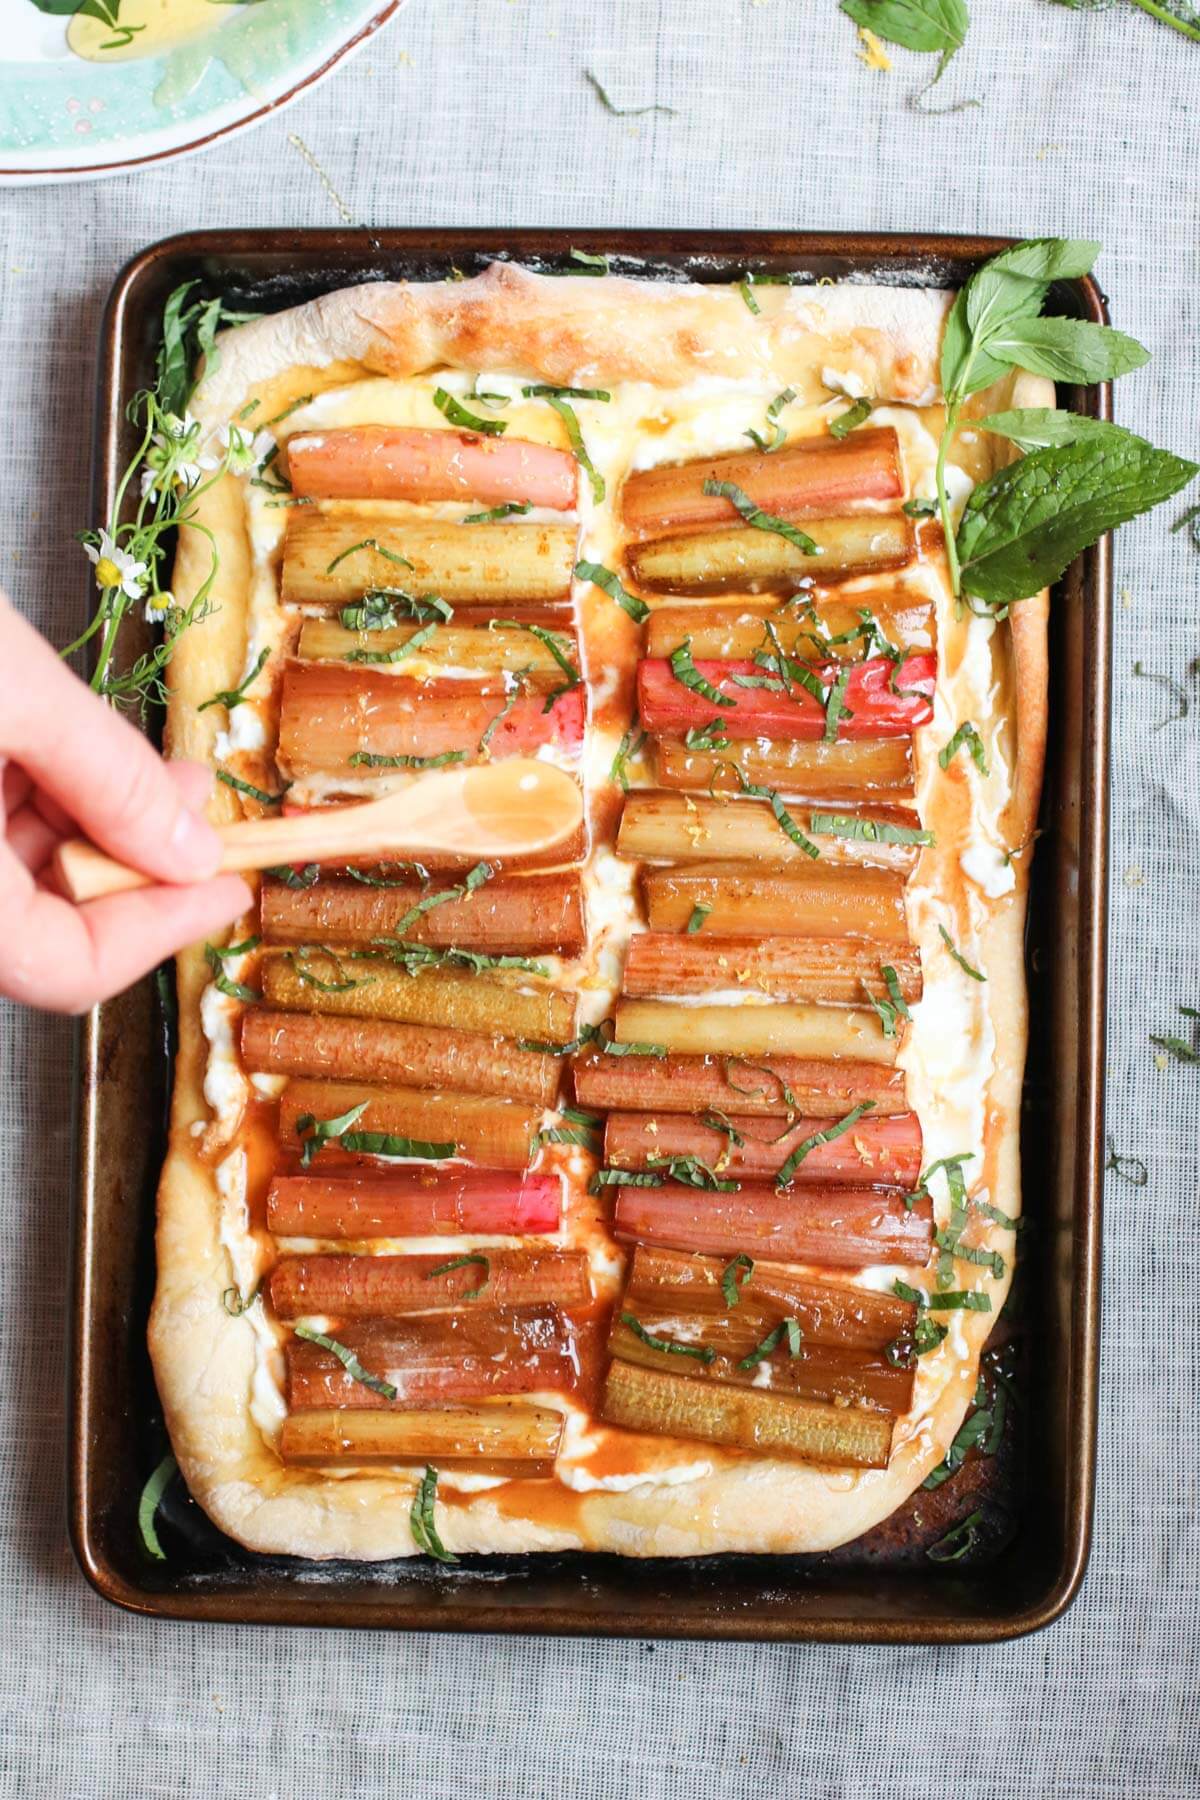 Ricotta flatbread with roasted rhubarb, honey, and mint. A few simple real food ingredients, quick and easy, and so yummy! | abraskitchen.com